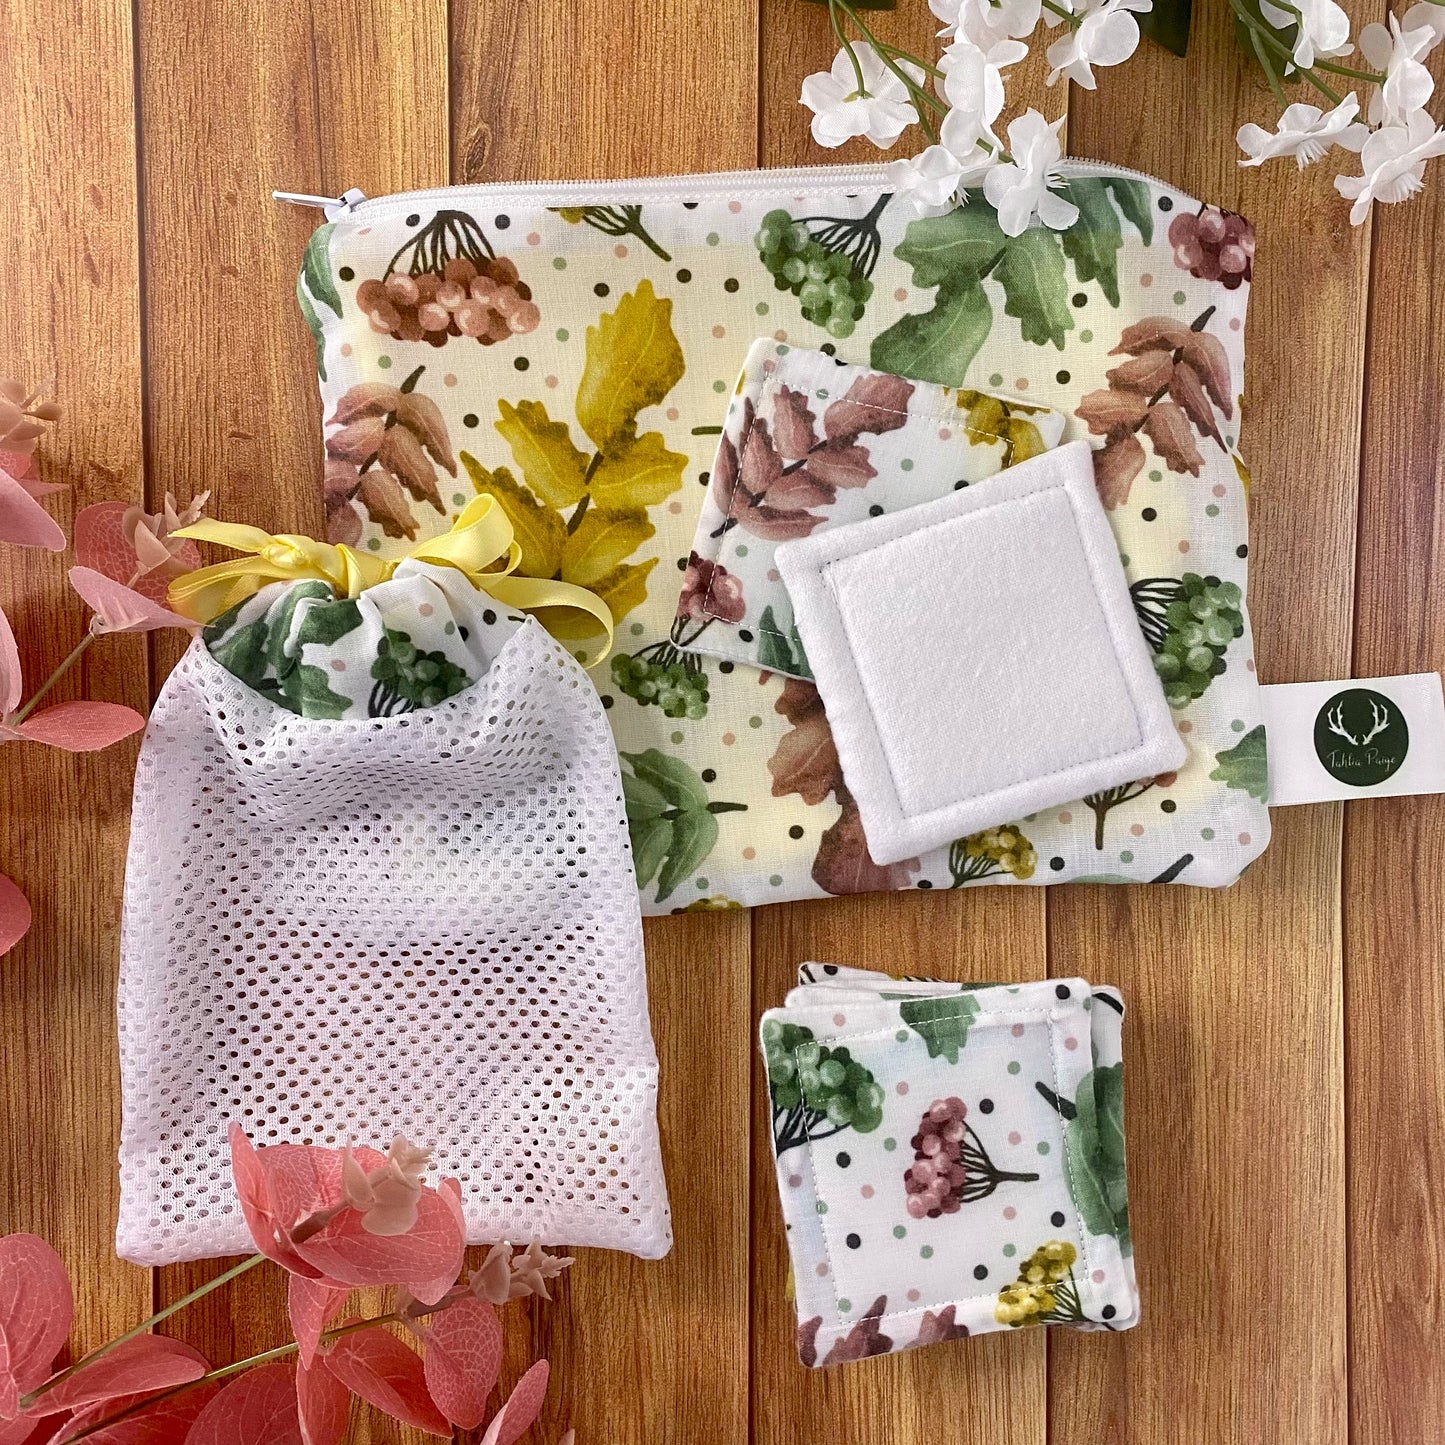 pretty foliage patterned pouch, reusable makeup removal pads and washbag on wooden background with foliage around it